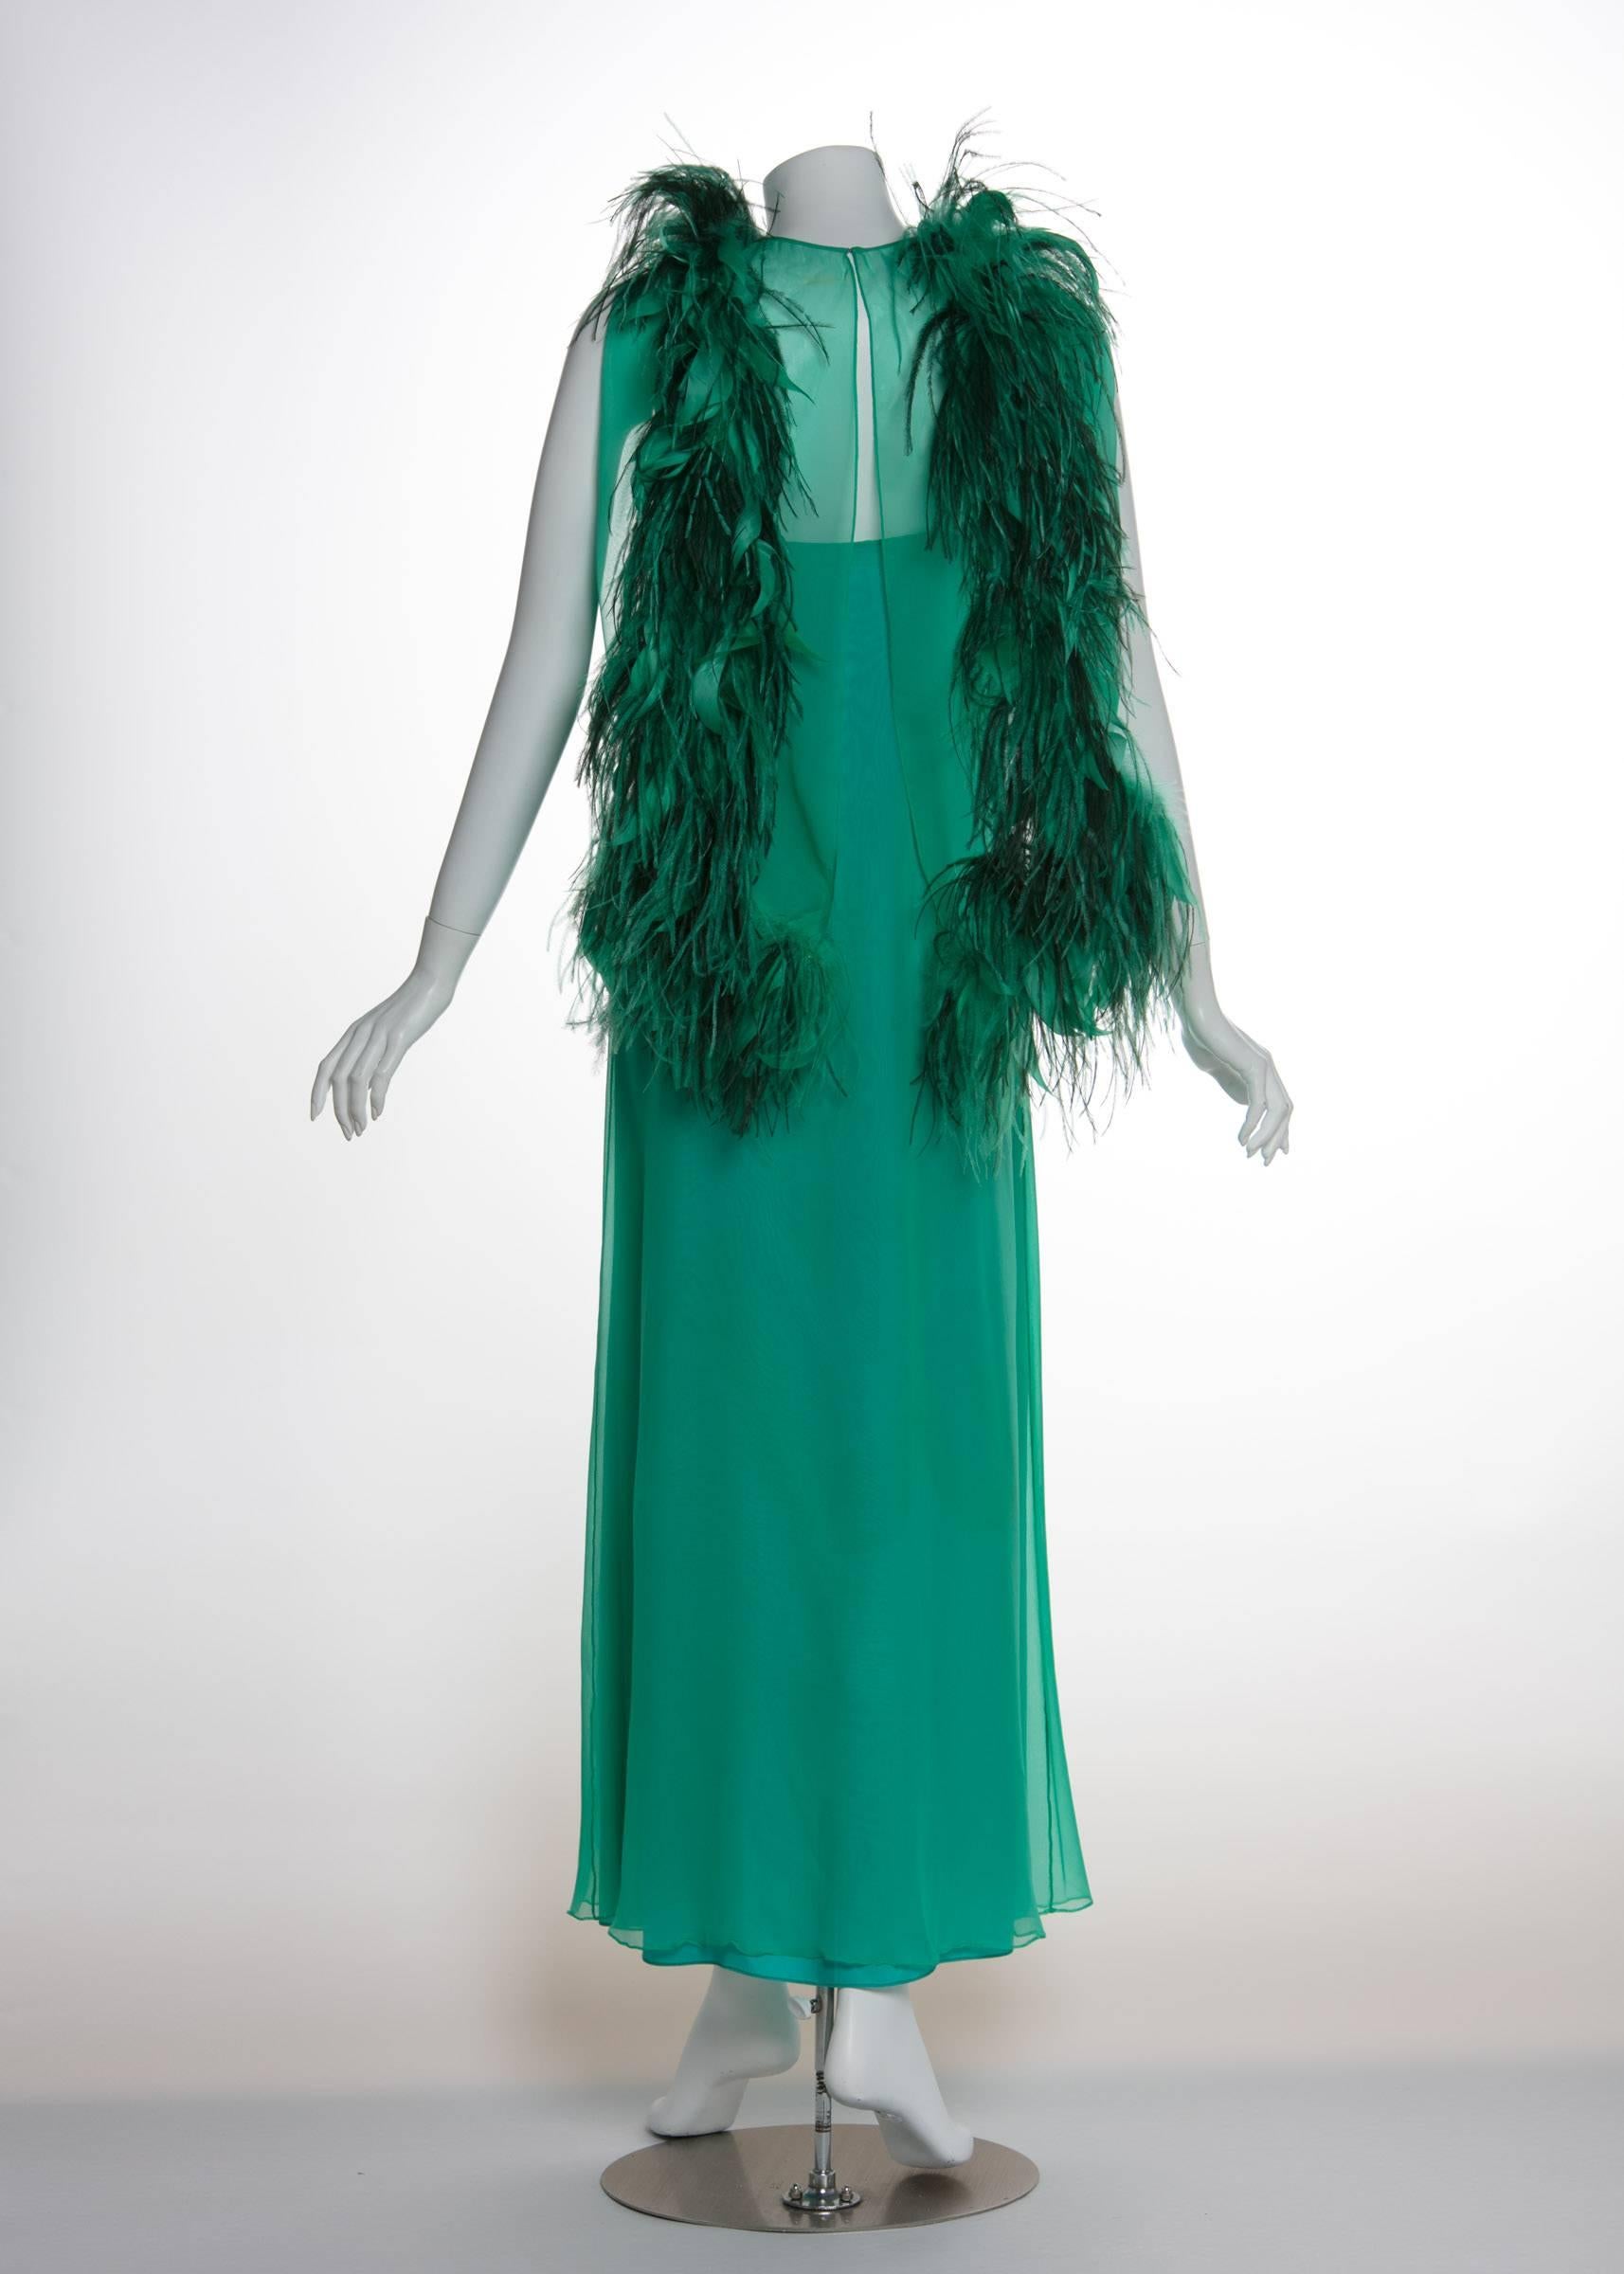 1970s Malcolm Starr Emerald Green Chiffon Gown & Ostrich Feather Cape Set 1